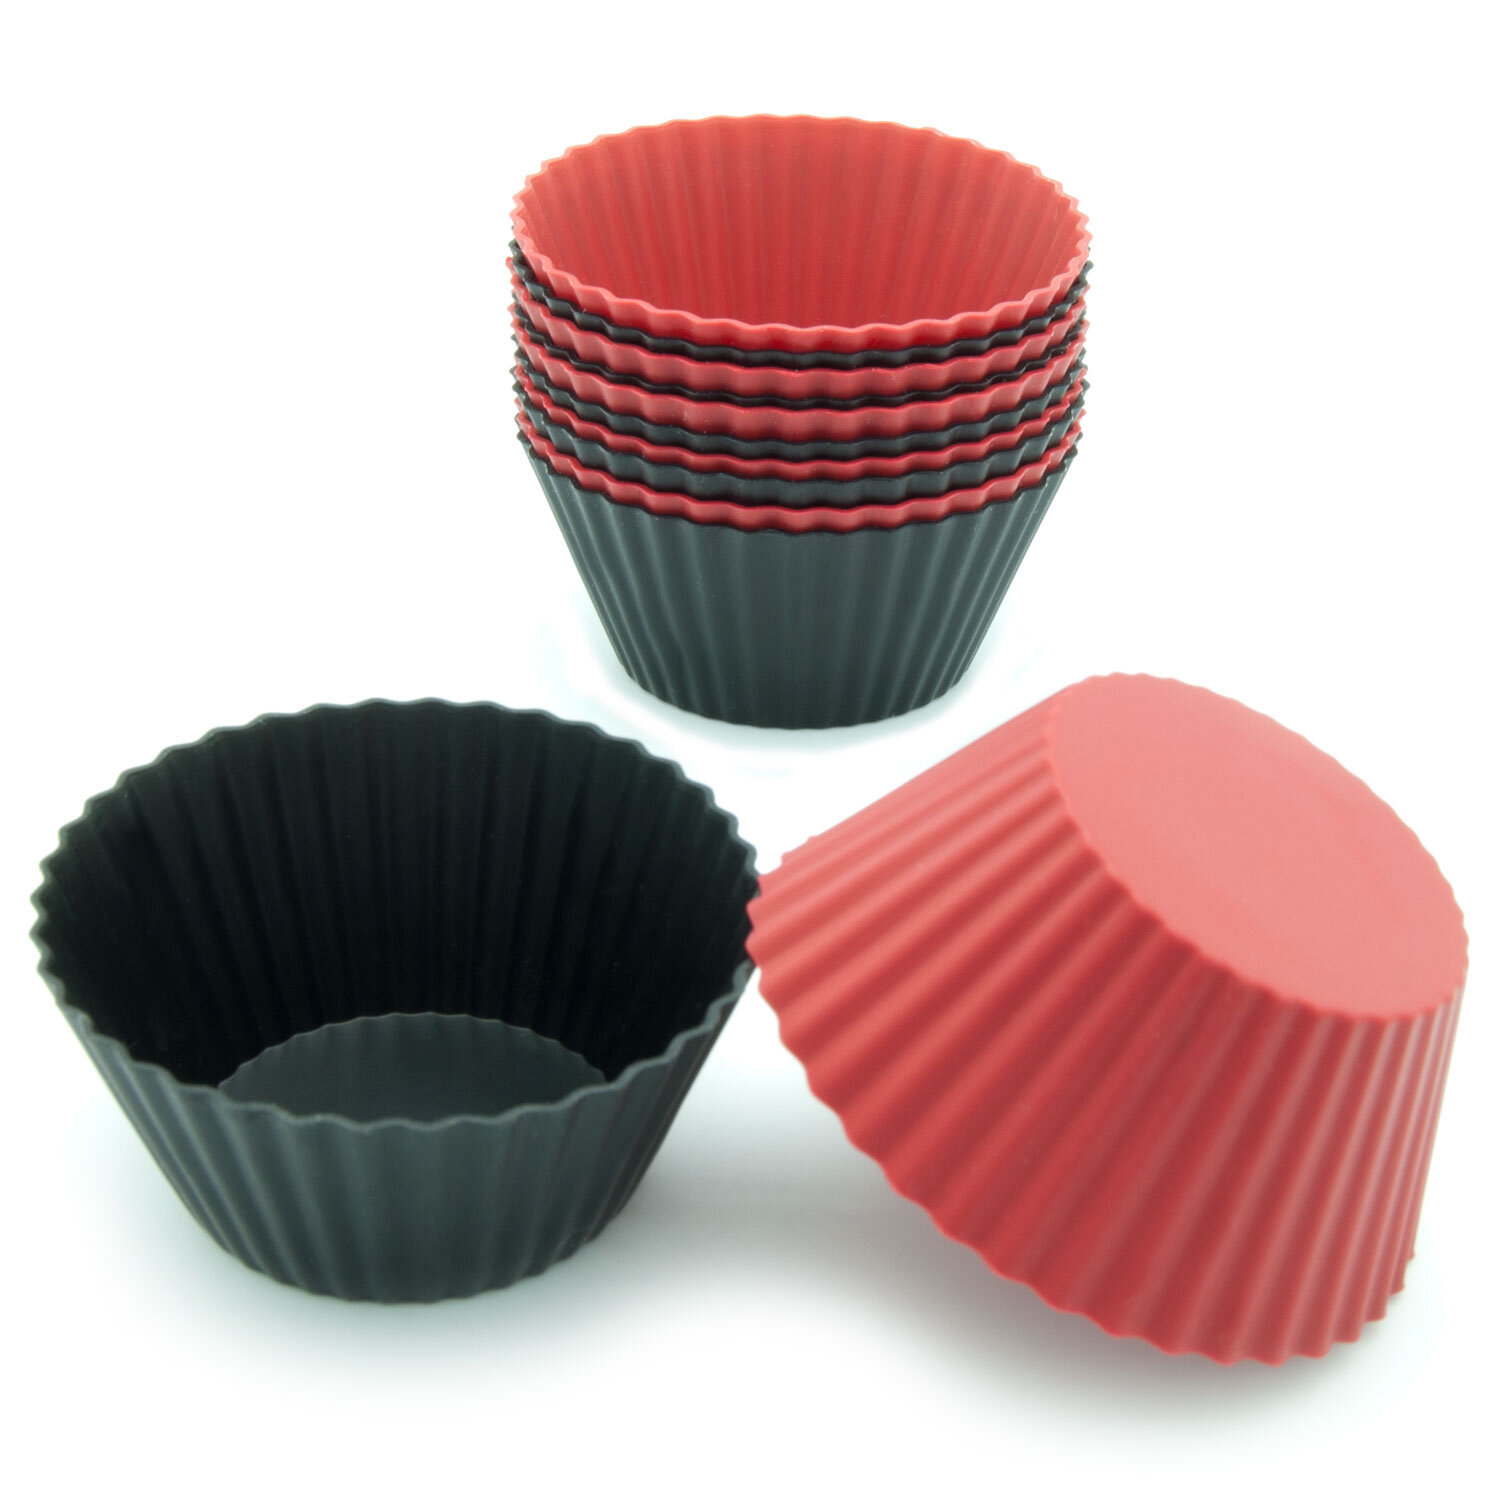 Cupcake Holder Silicone Muffin Cups Cake Molds 12 Stand Alone Reusable Flexible Non-Stick Baking Liners Standard Size Oven, Dishwasher, Freezer, and M